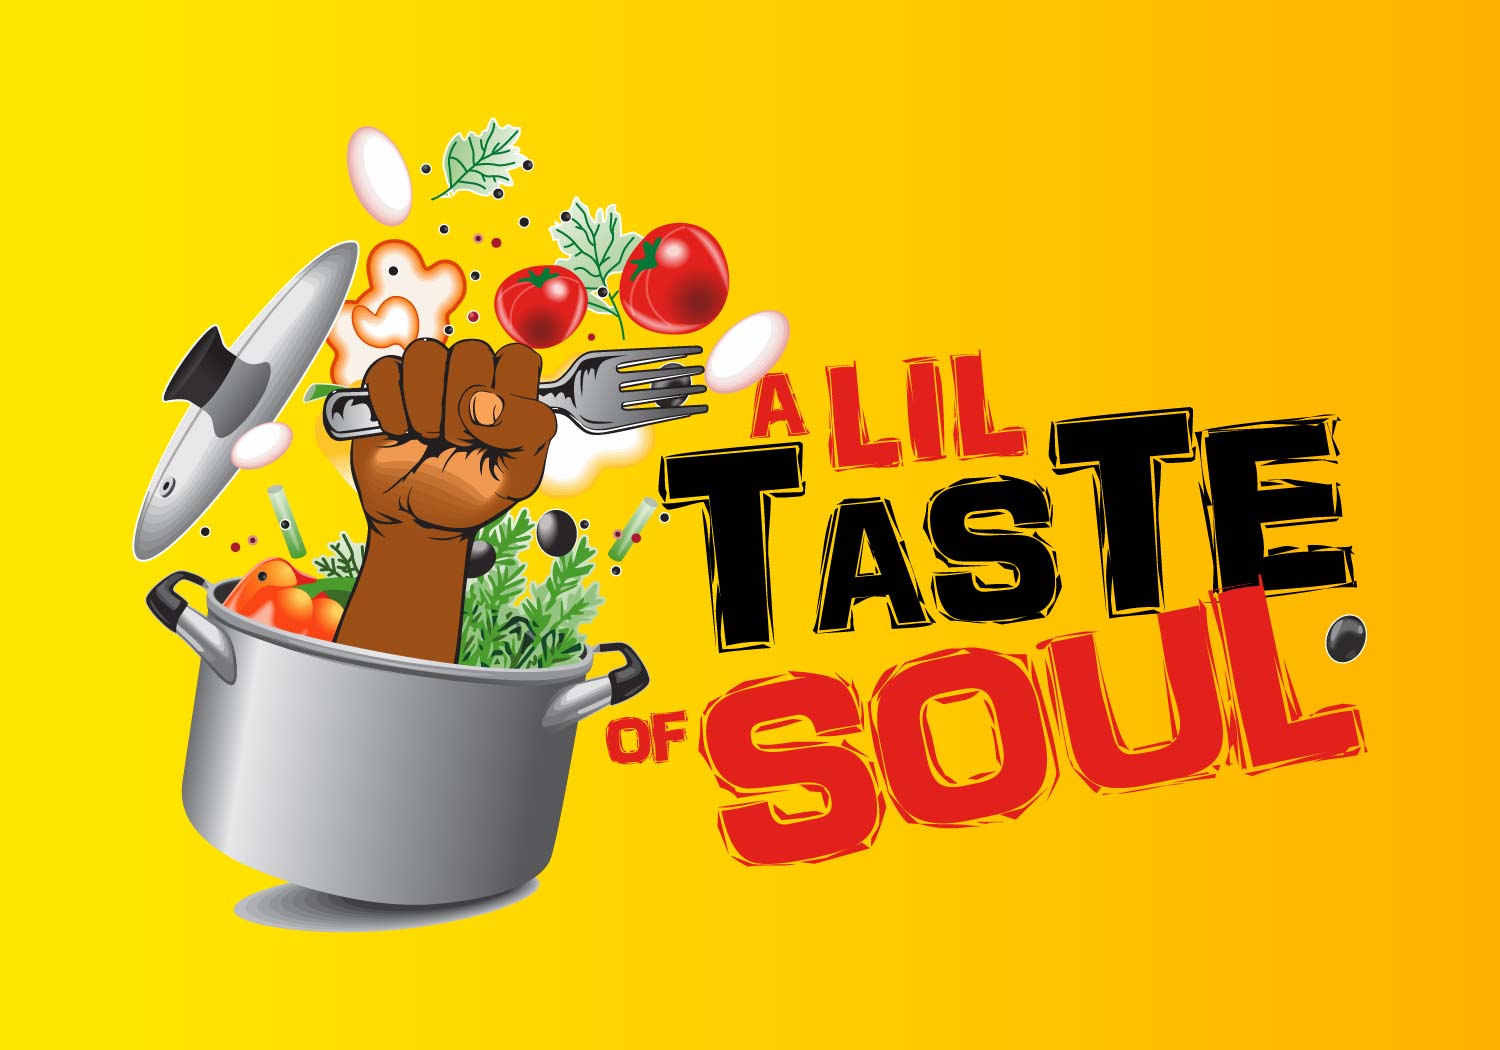 The logo or business face of "A Lil Taste of Soul "